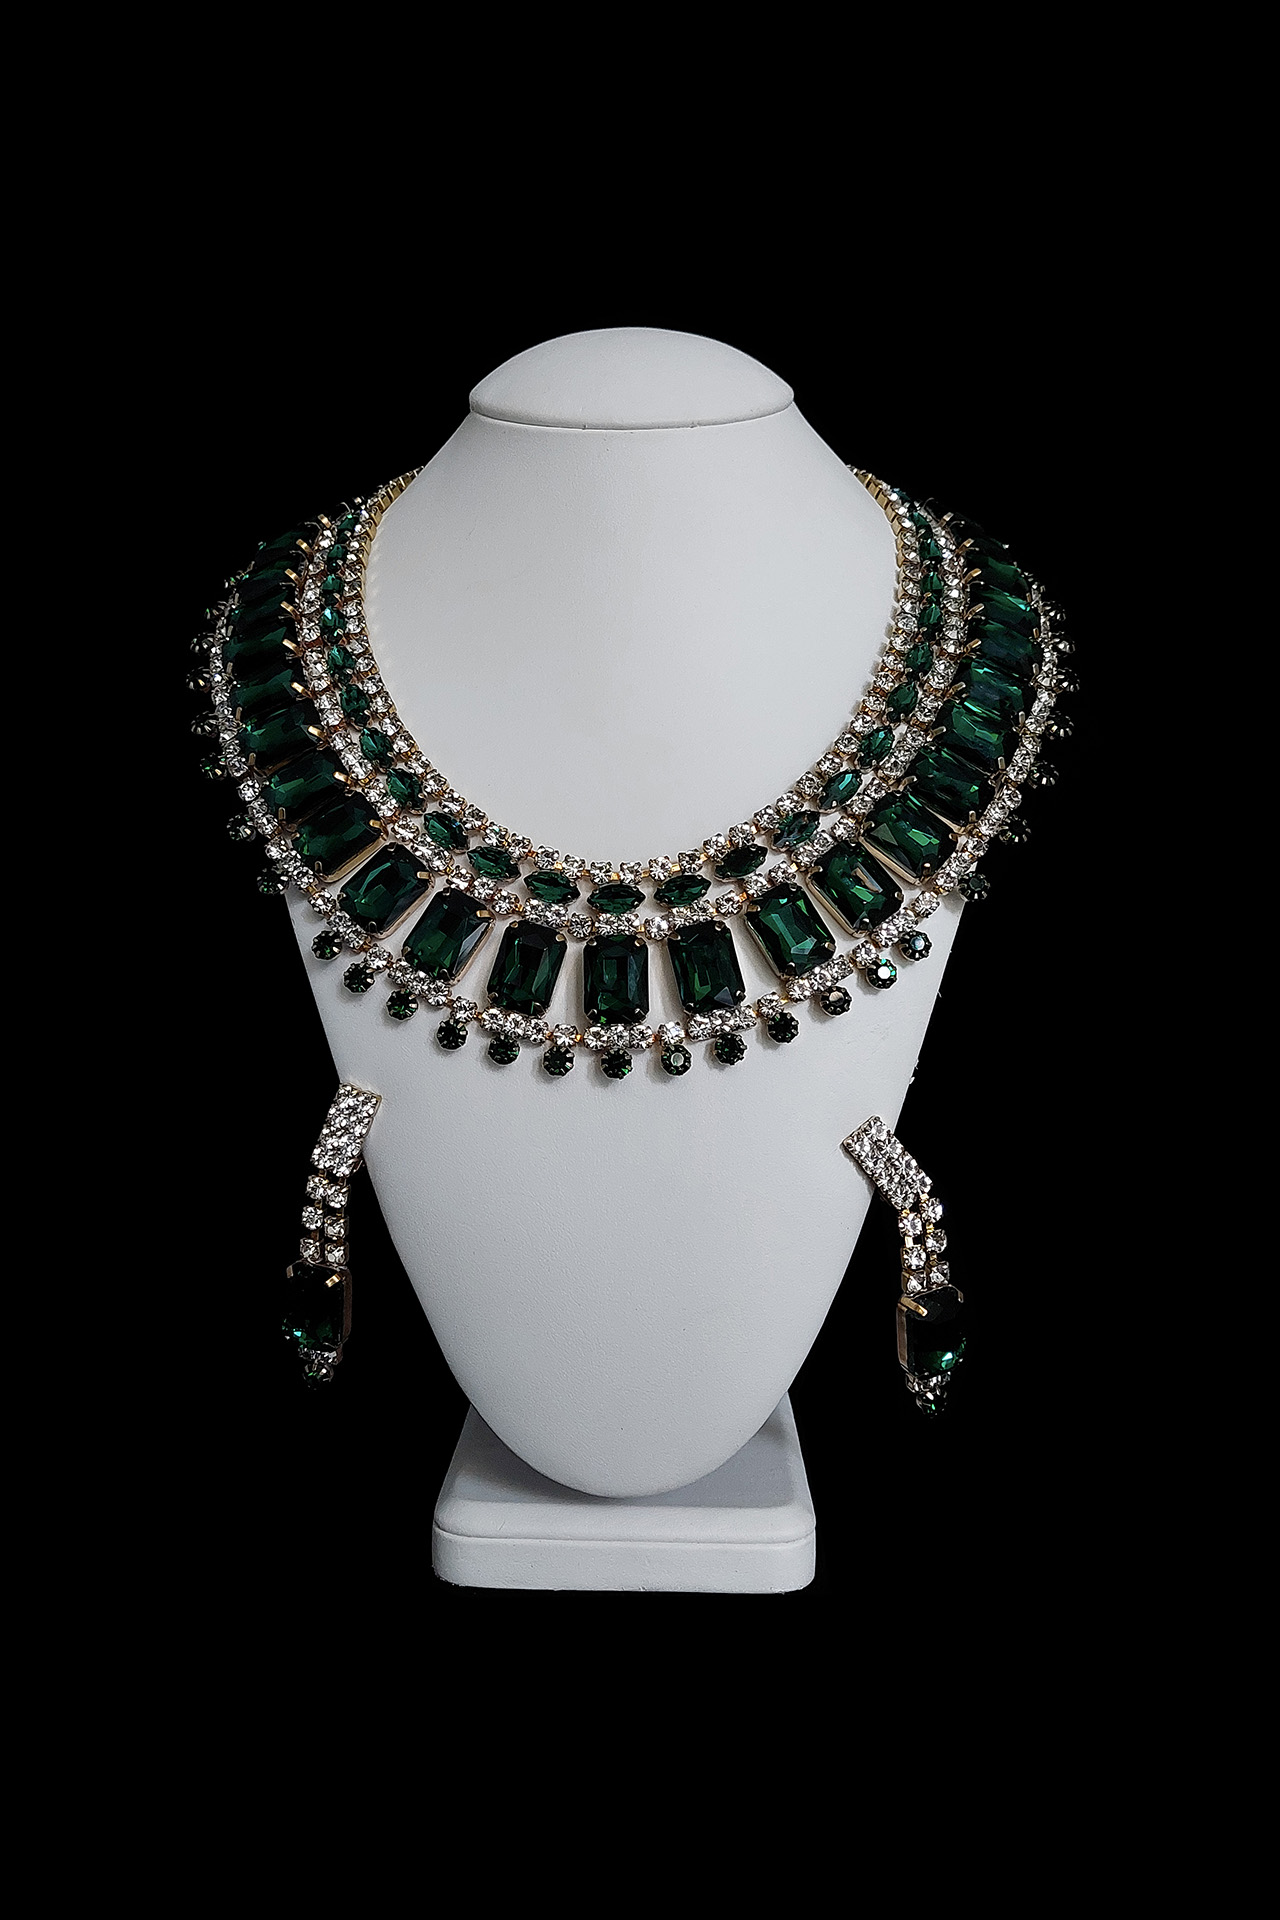 Handmade designer earrings and necklace set from green rhinestones